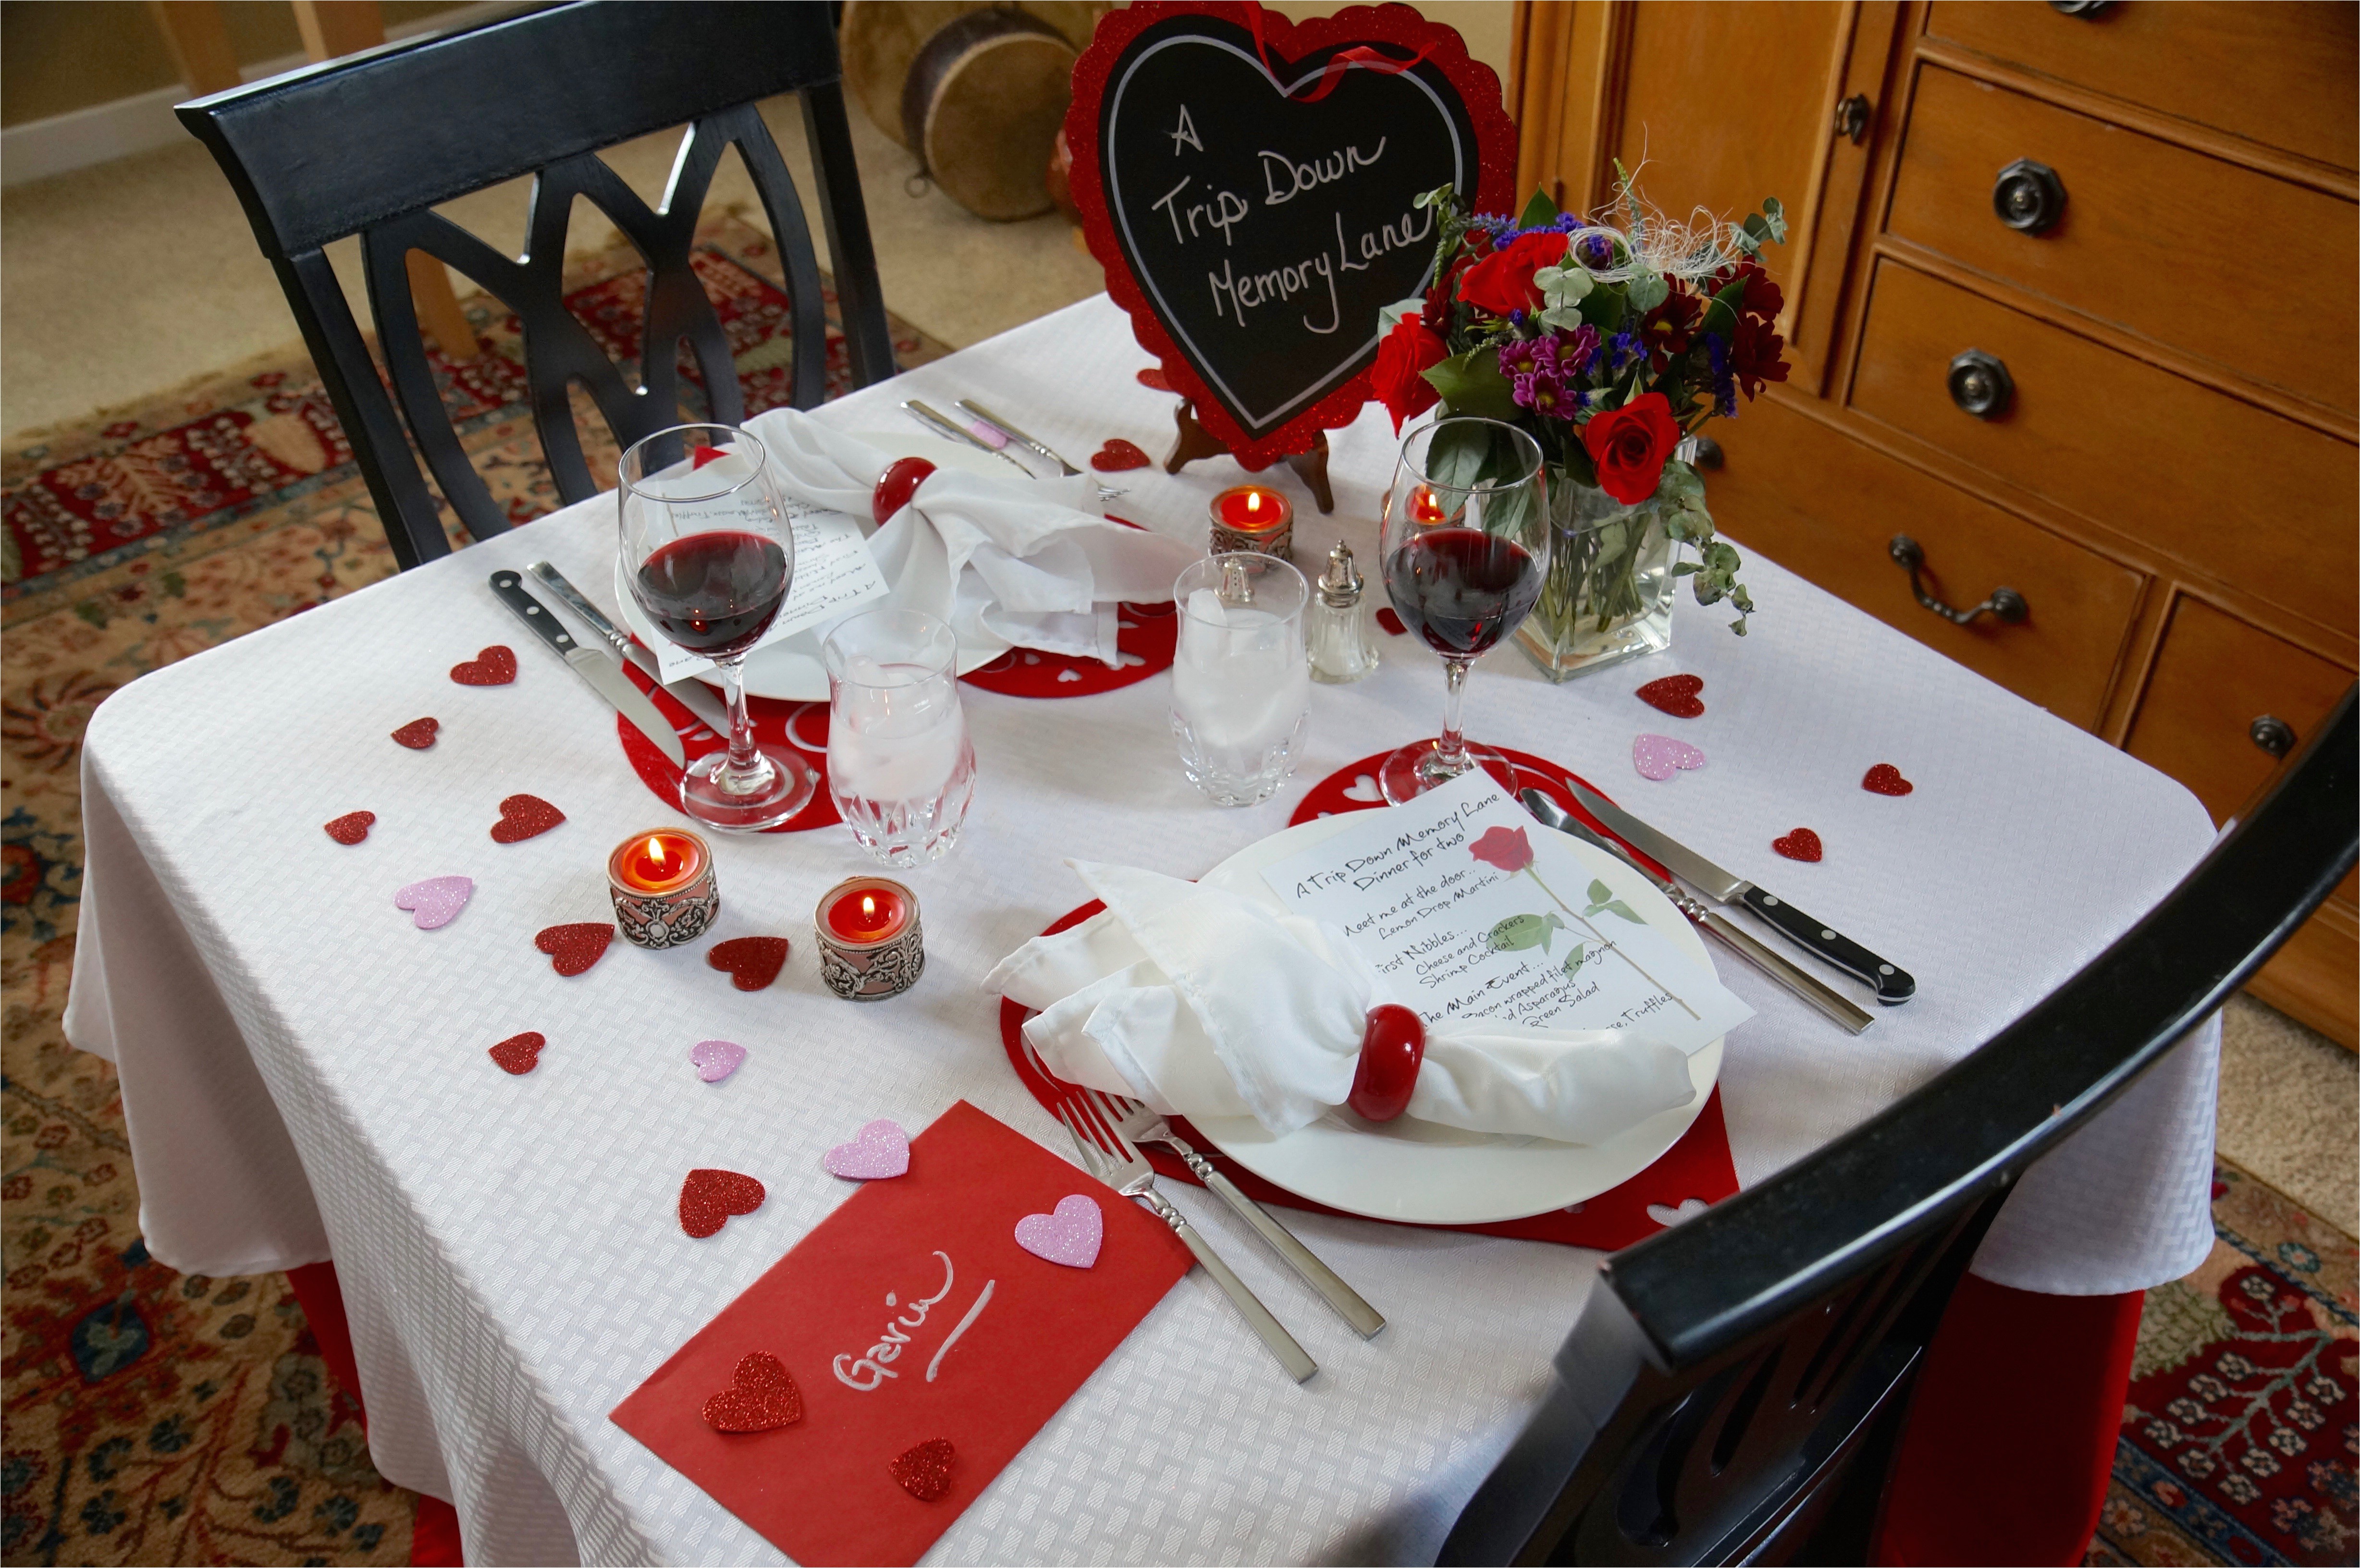 Planning A Romantic Dinner at Home A Romantic Dinner Idea A Trip Down Memory Lane